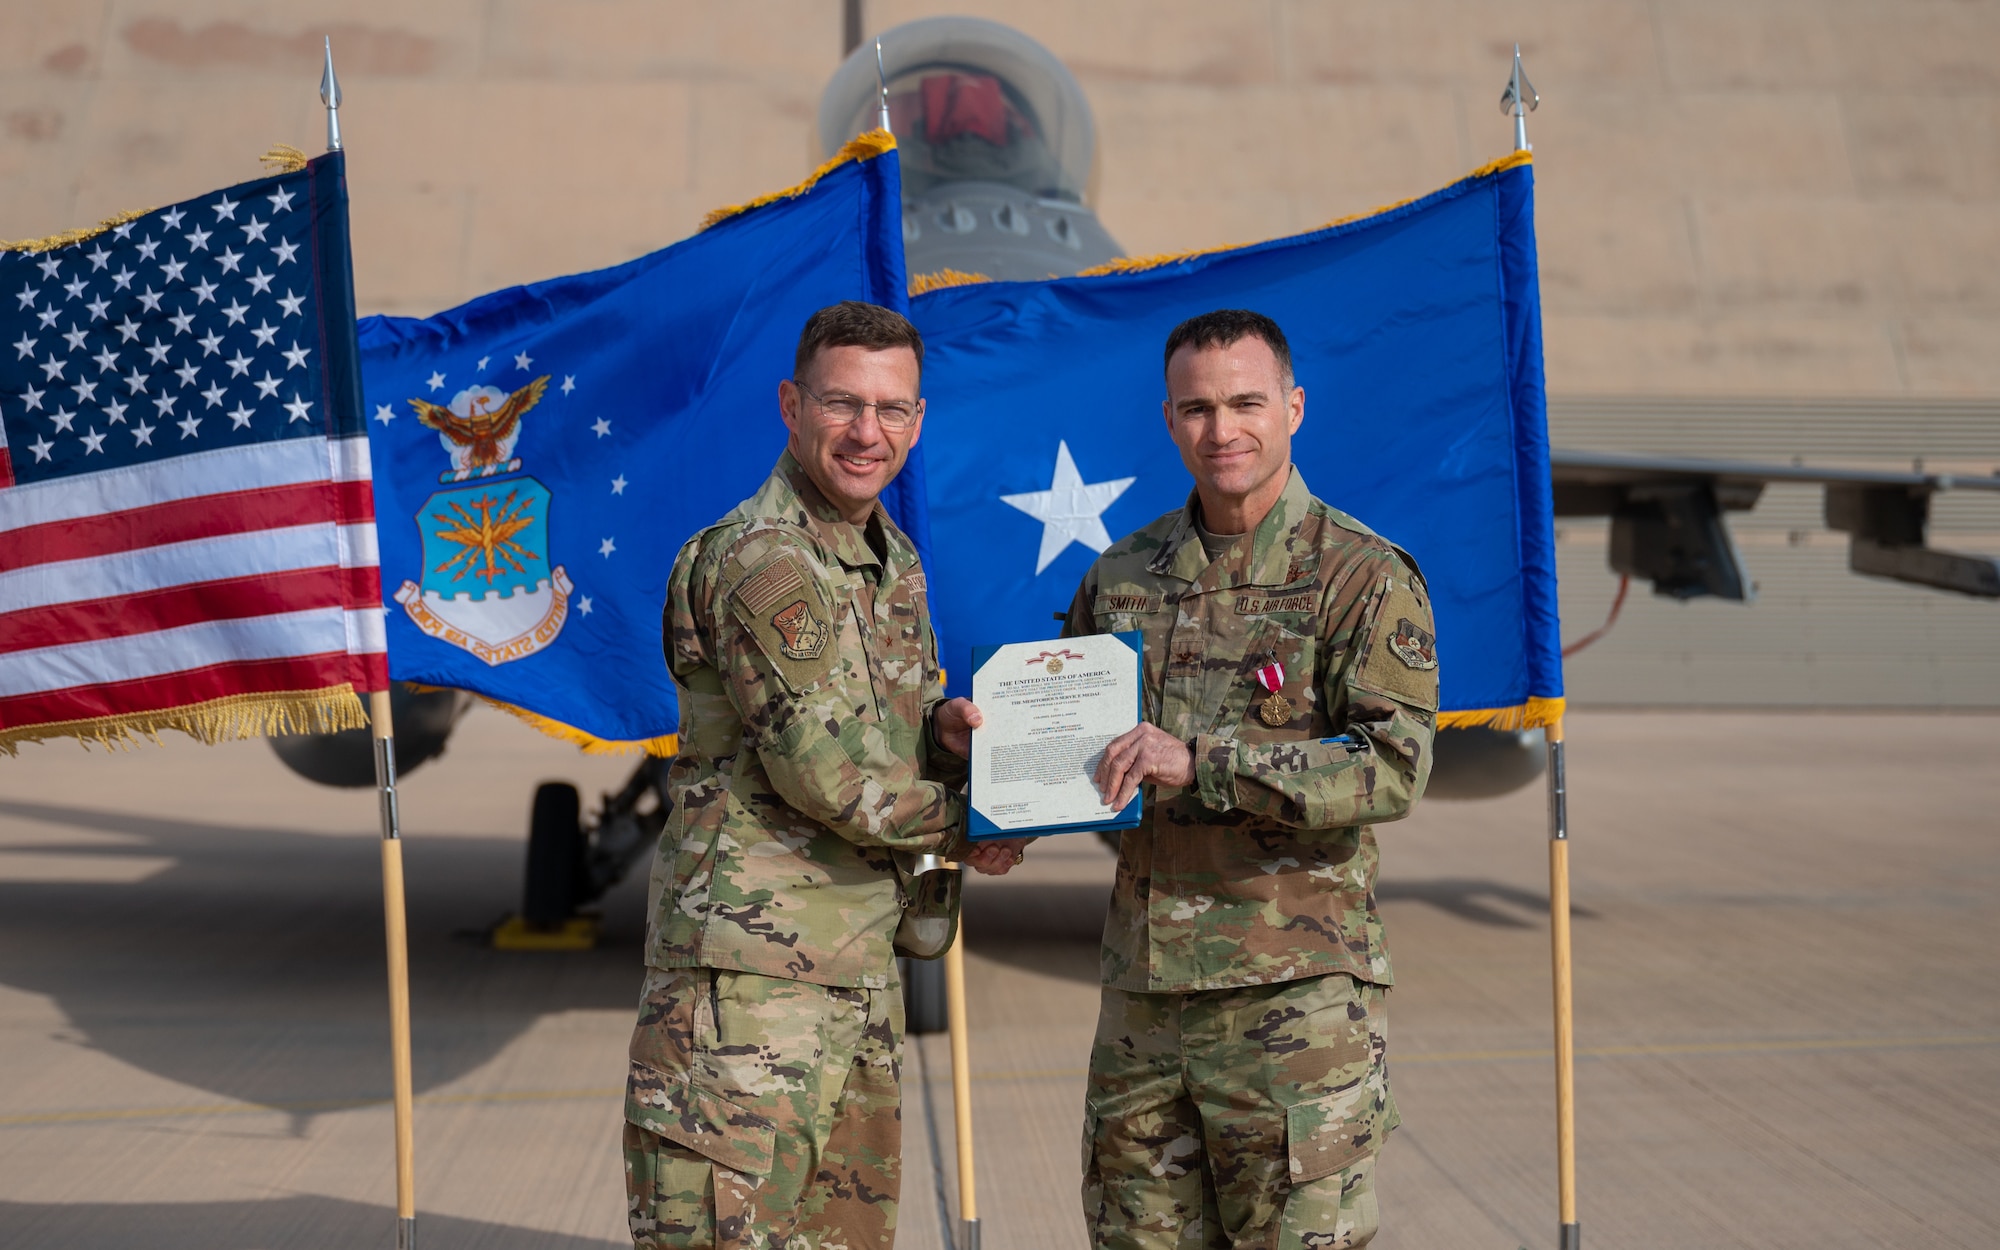 Col. Jason Smith, right, outgoing 378th Expeditionary Operations Group commander, receives the Meritorious Service Medal from Brig. Gen. Robert D. Davis, left, 378th Air Expeditionary Wing commander, during the 378th EOG change of command ceremony at Prince Sultan Air Base, Kingdom of Saudi Arabia, Dec. 26, 2021. The Meritorious Service Medal is awarded to members of the armed services who distinguish themselves by outstanding service to the United States. (U.S. Air Force photo by Staff Sgt. Christina Graves)